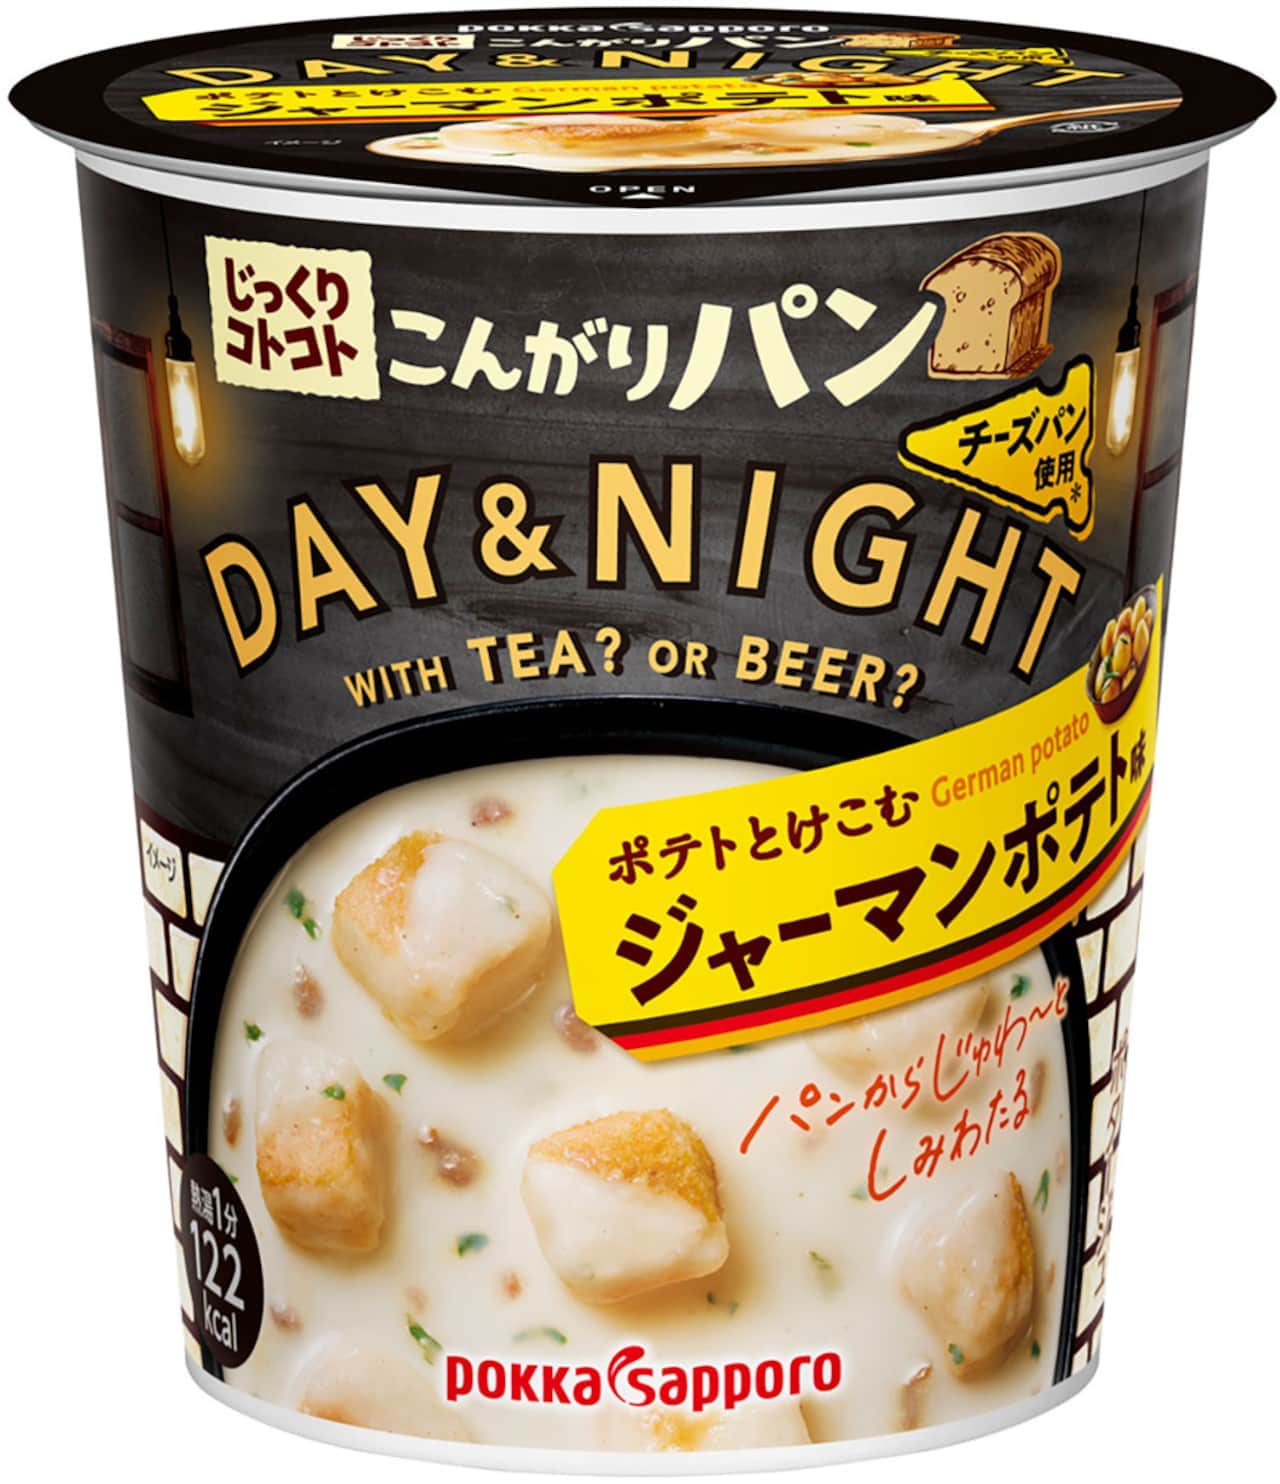 "DAY & NIGHT German potato flavor" "DAY & NIGHT butter chicken curry" in cup soup "Slowly Kotokoto Kongari Bread"